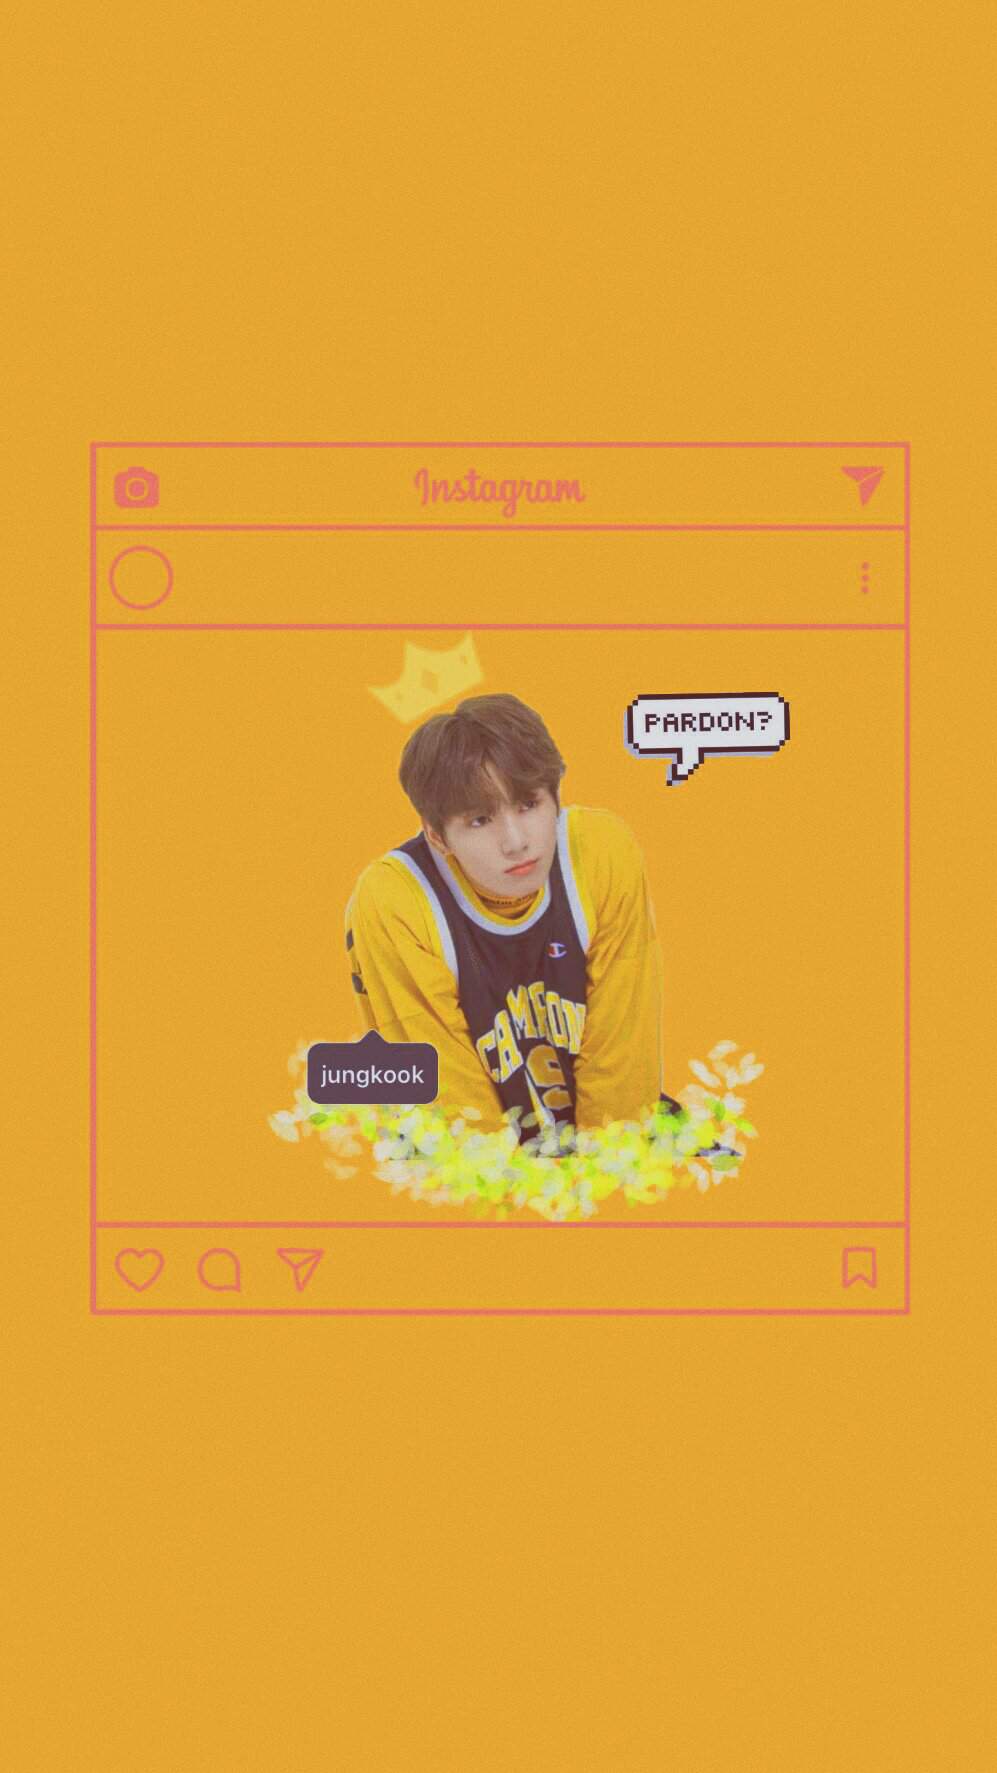 Jungkook bts phone background aesthetic with yellow and pink colors - Jungkook